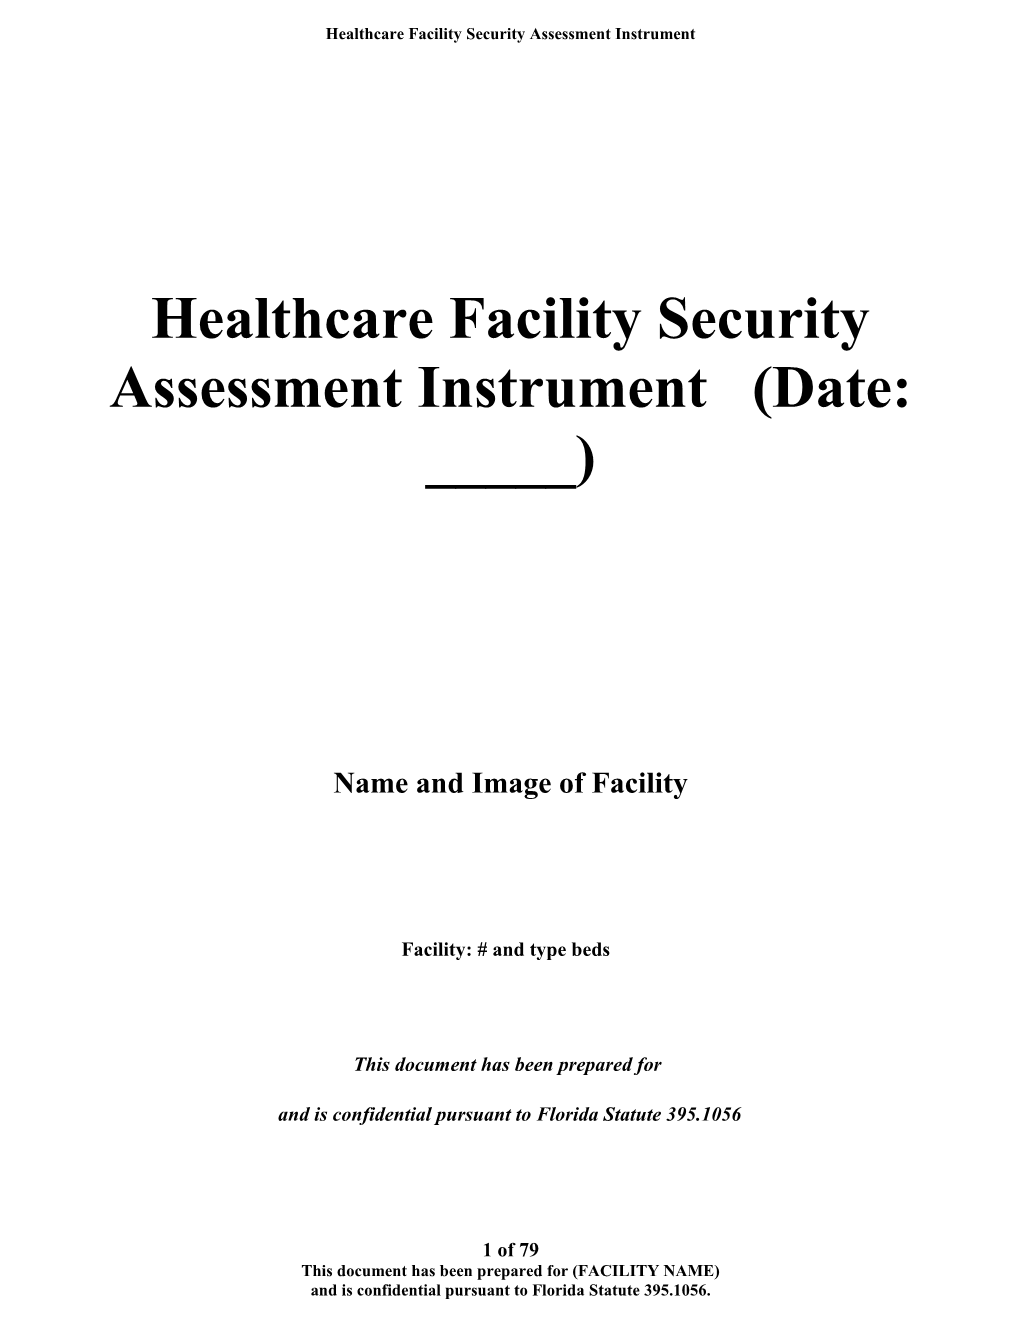 Healthcare Facility Security Assessment Instrument